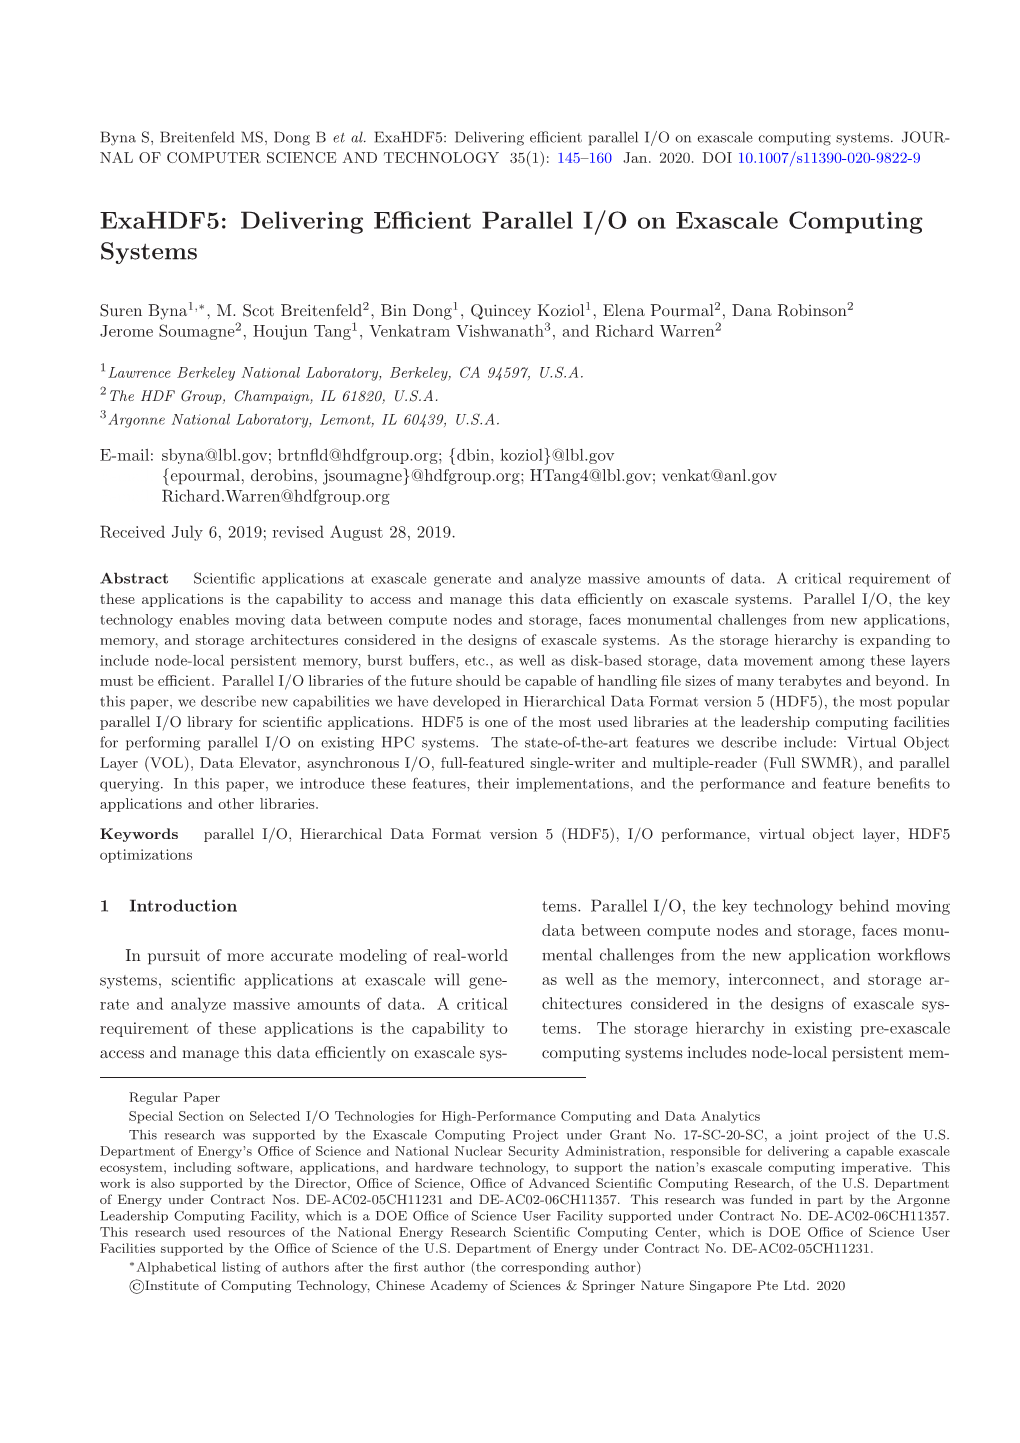 Exahdf5: Delivering Efficient Parallel I/O on Exascale Computing Systems